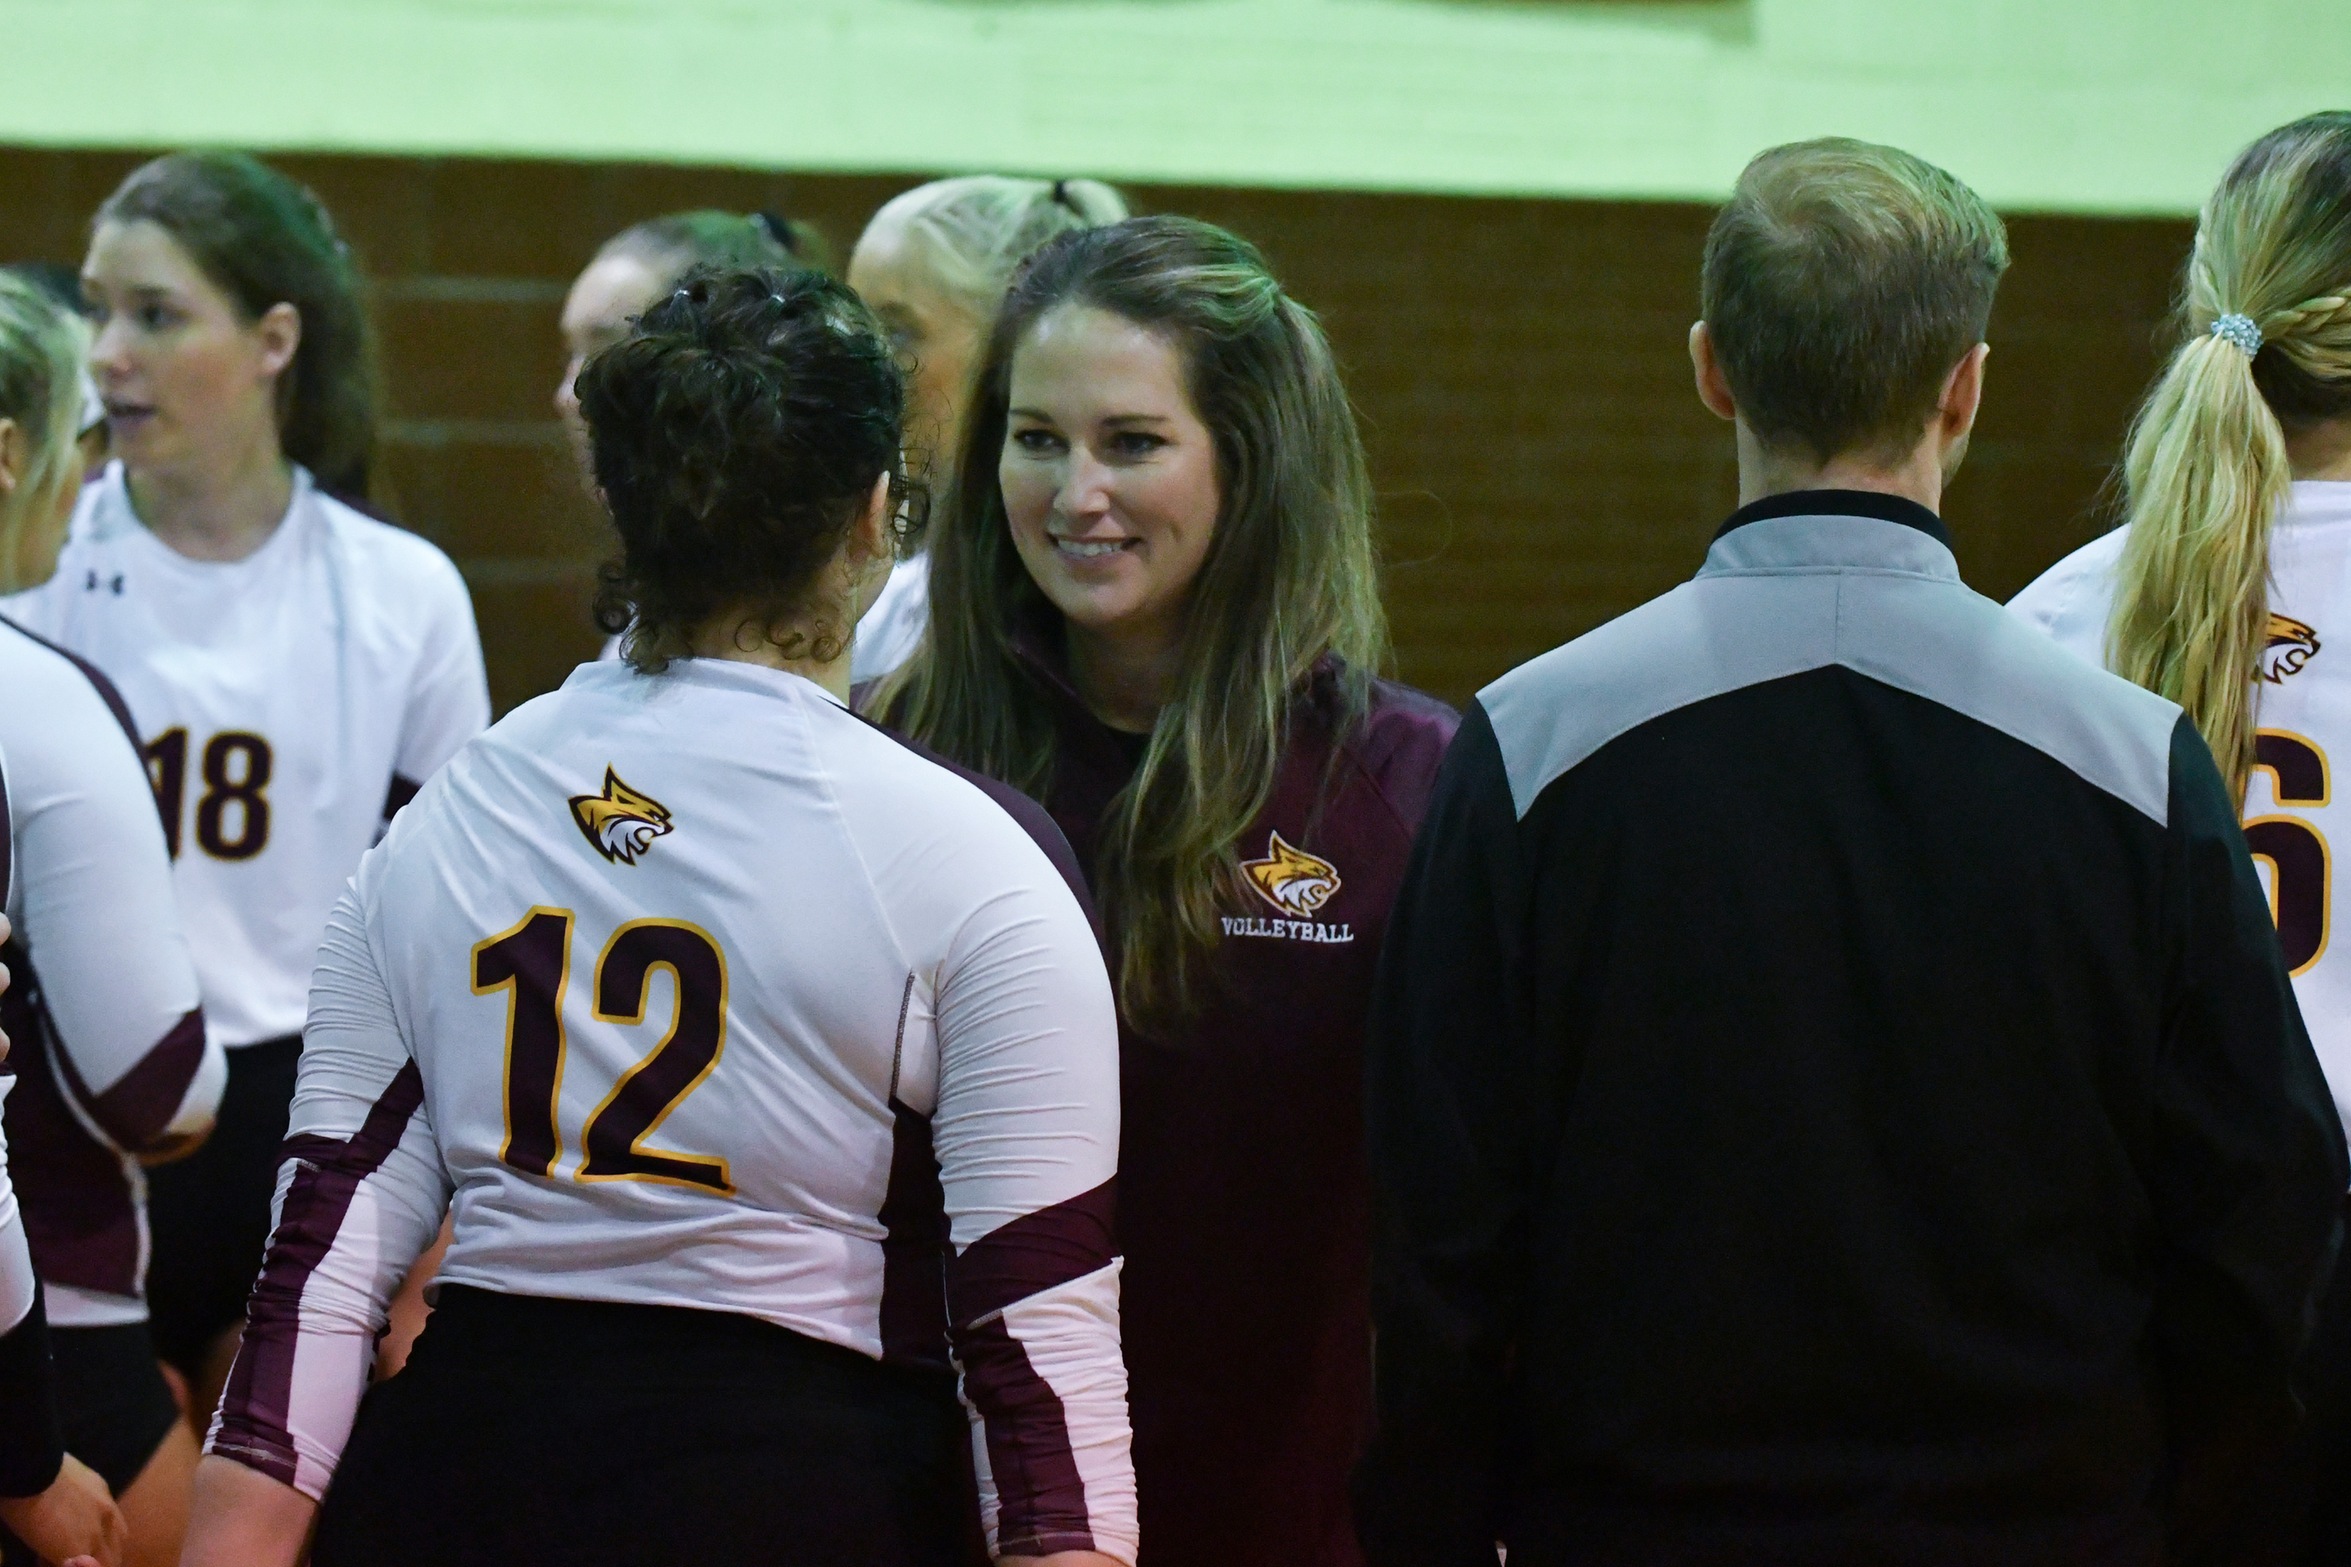 Pearl River volleyball defeats Louisiana Christian in thriller